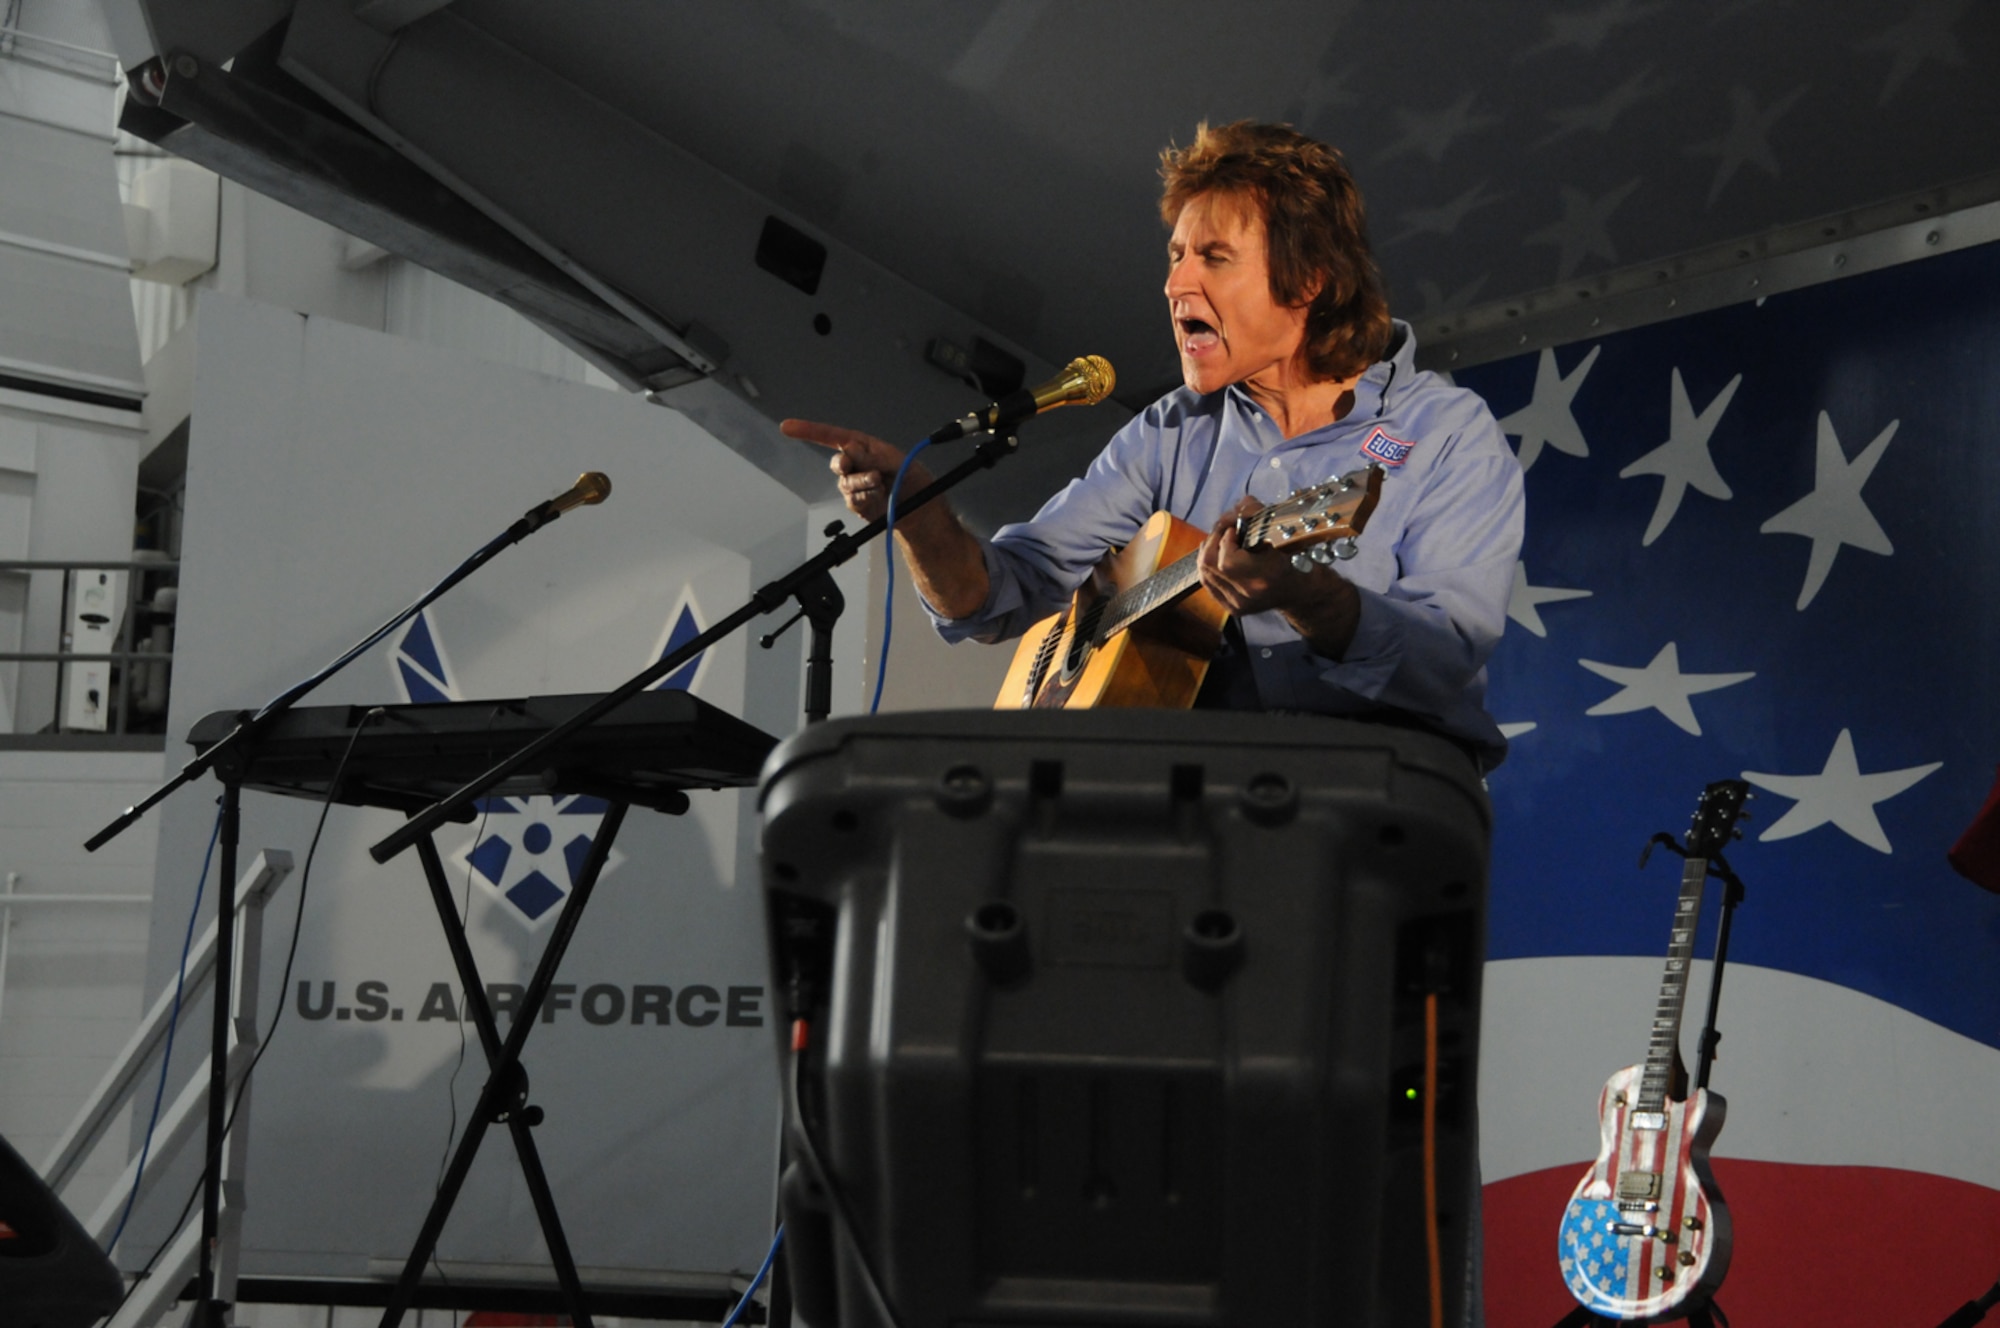 Singer/songwriter John Parr gave a concert to the men and women of the 916th Air Refueling Wing on Dec. 11 here. He included popular songs he wrote in the 80s, but also new songs we wrote specifically for America's armed forces. (USAF photo by Tech. Sgt. Scotty Sweatt, 916ARW/PA)